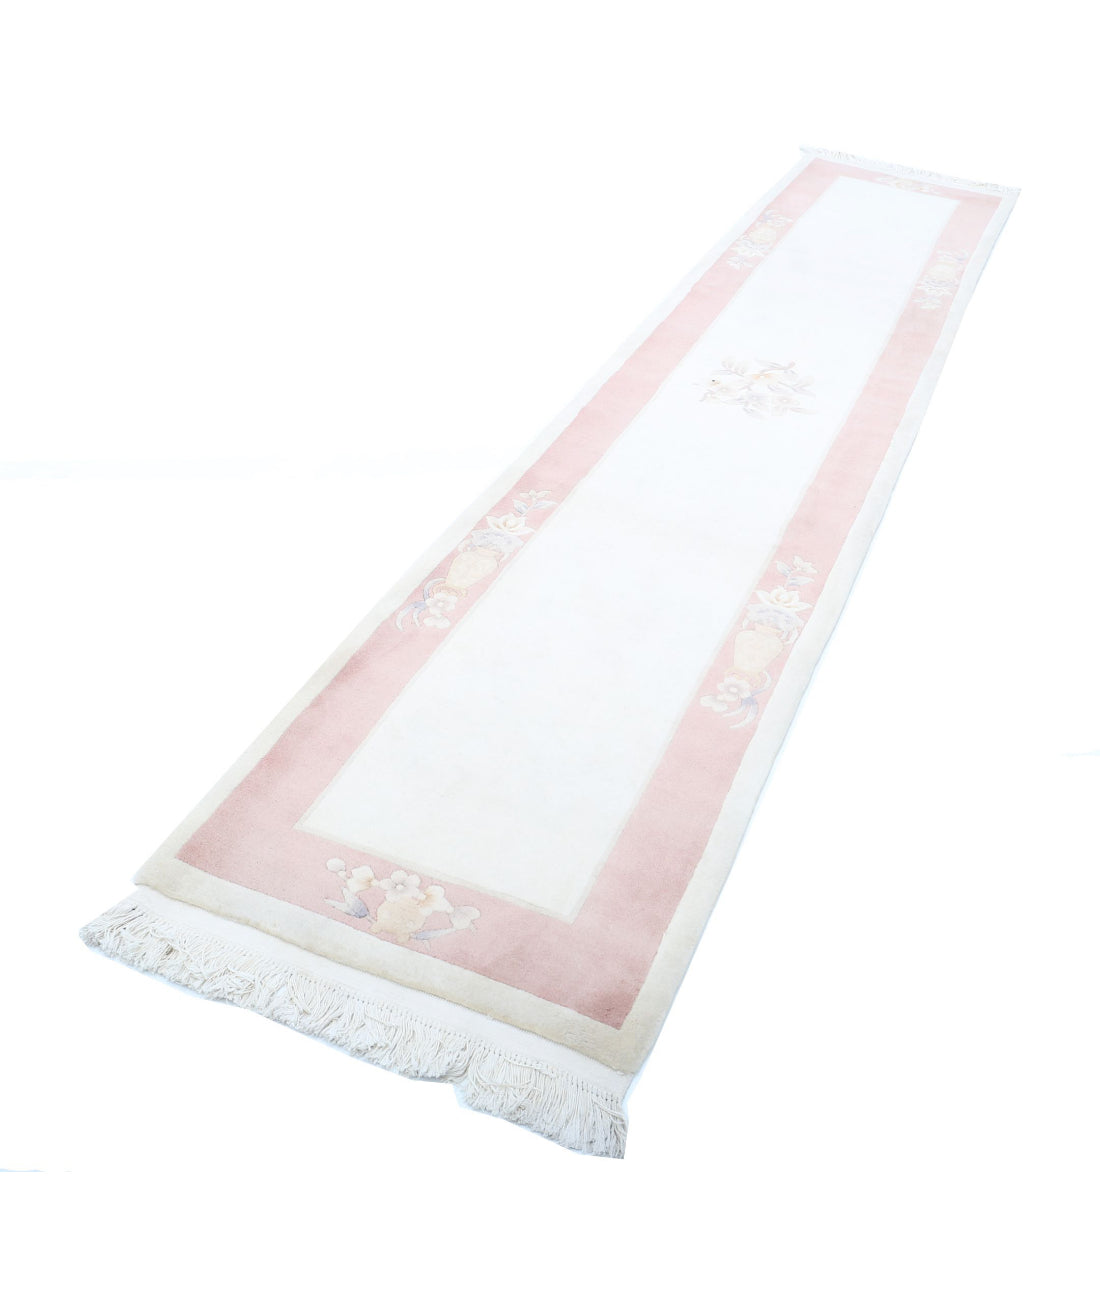 Hand Knotted Chinese Wool Rug - 2'6'' x 11'11'' 2'6'' x 11'11'' (75 X 358) / Ivory / Pink